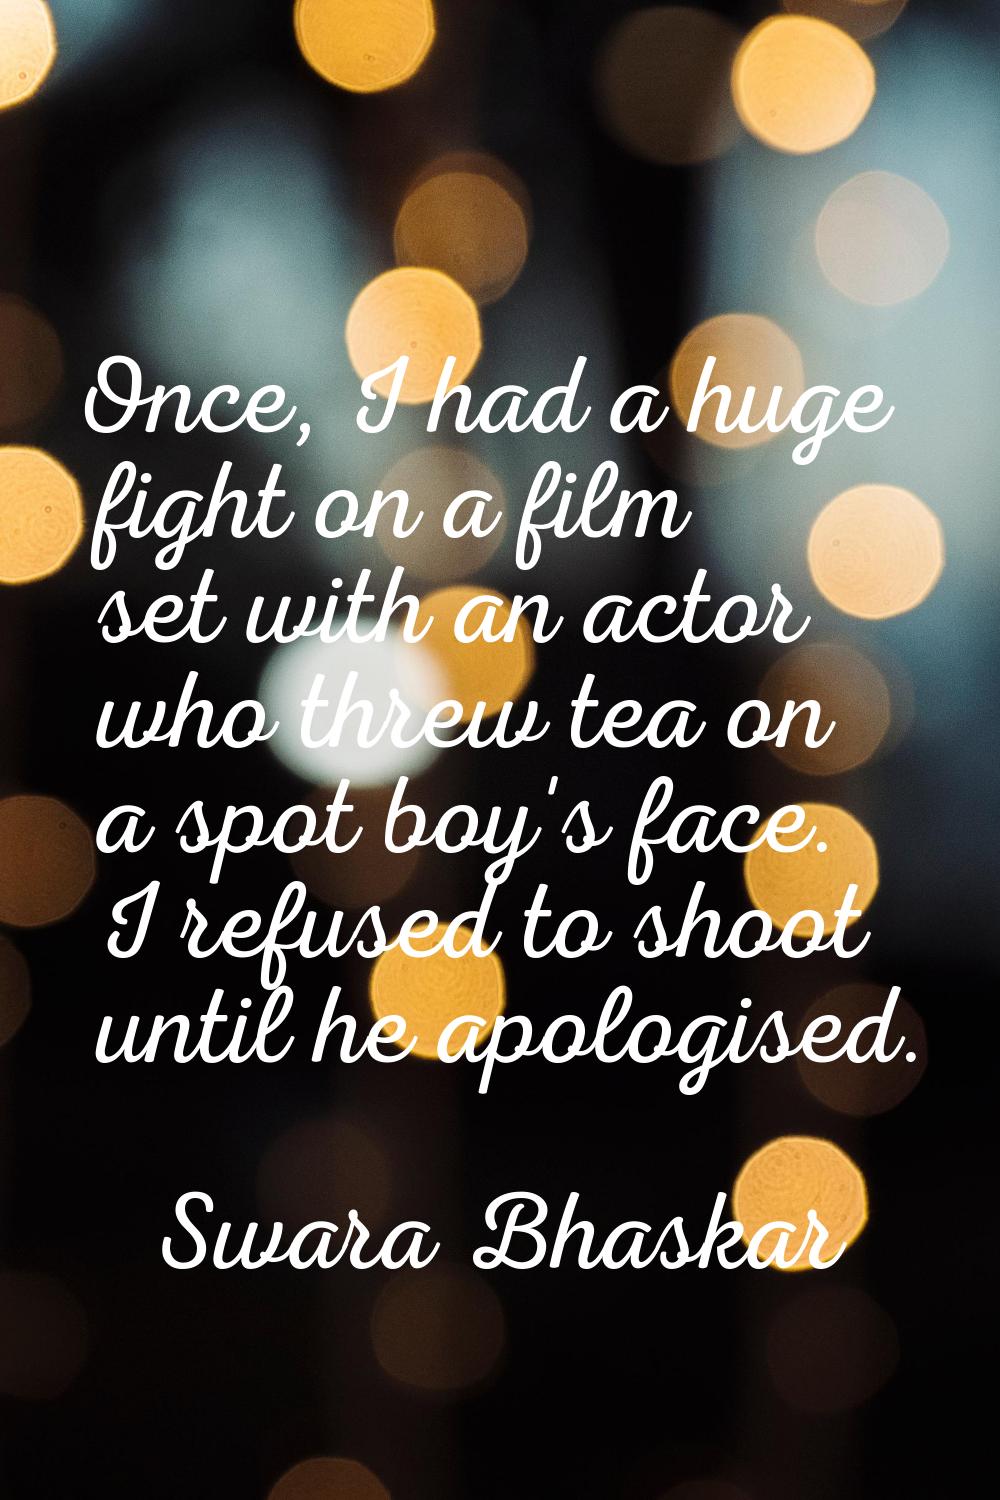 Once, I had a huge fight on a film set with an actor who threw tea on a spot boy's face. I refused 